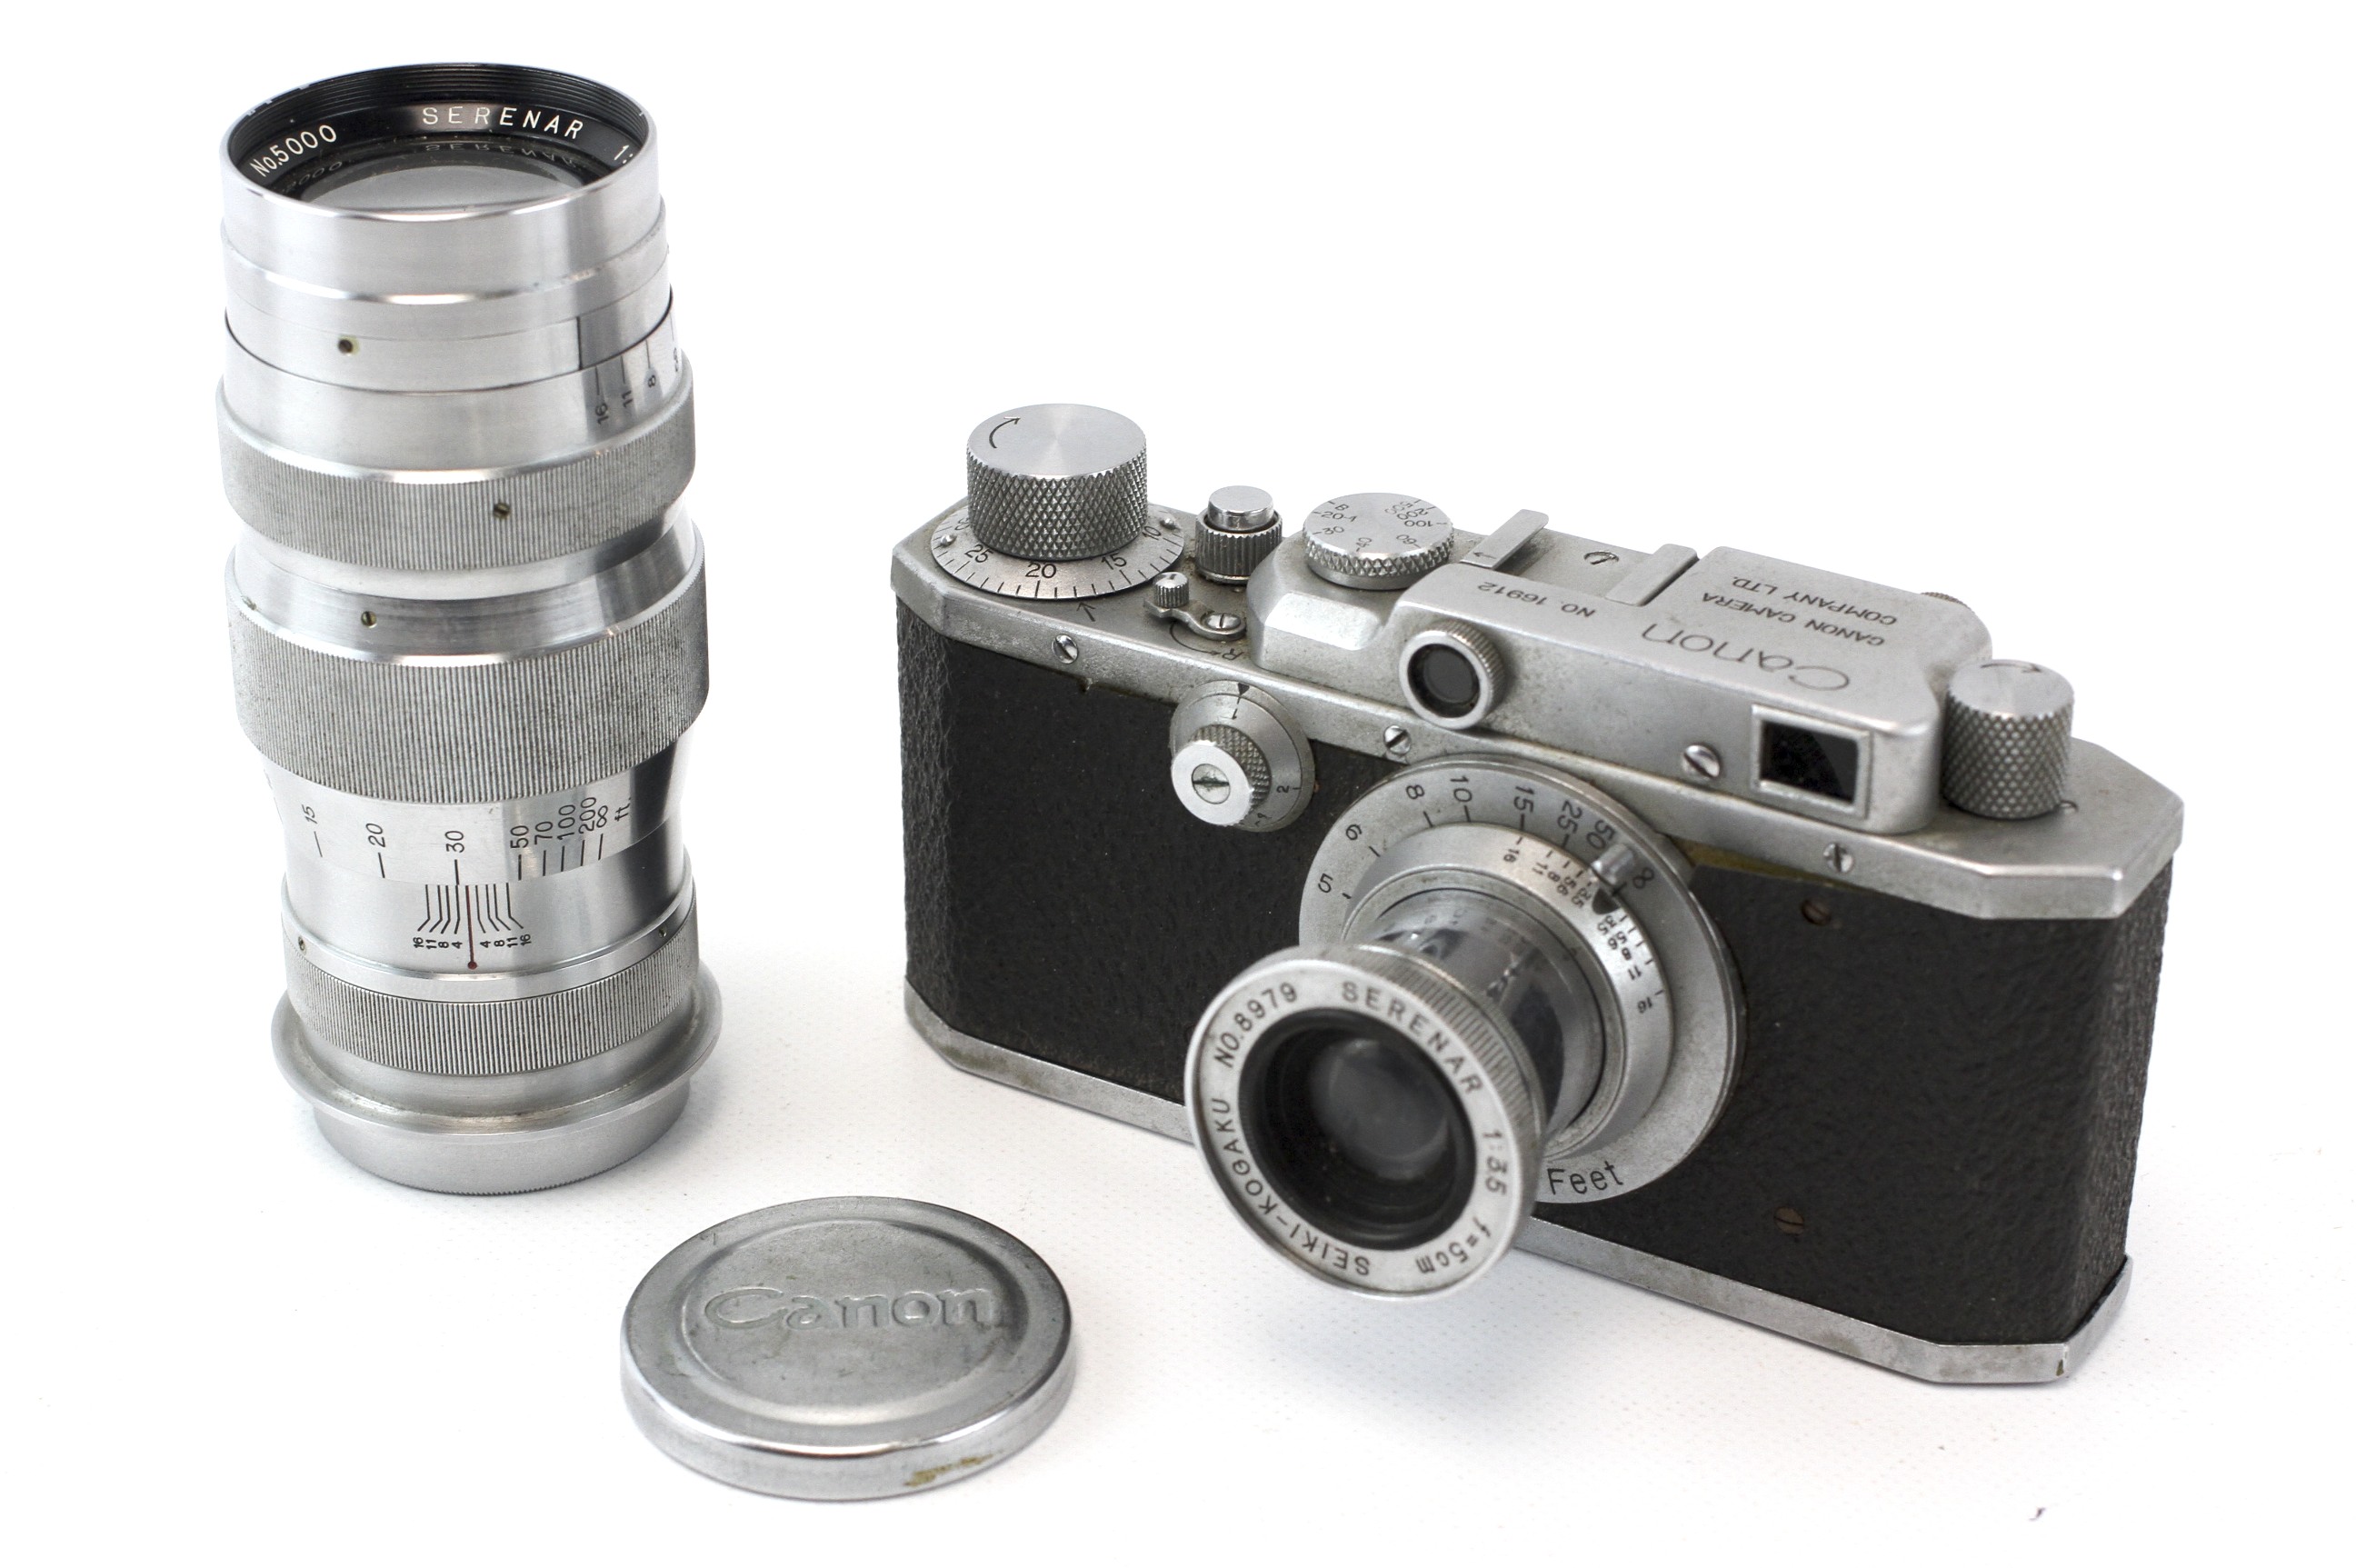 A Canon SII 35mm rangefinder camera outfit. Chrome body, Serial Number 16912. With a Serenar 5cm f3.